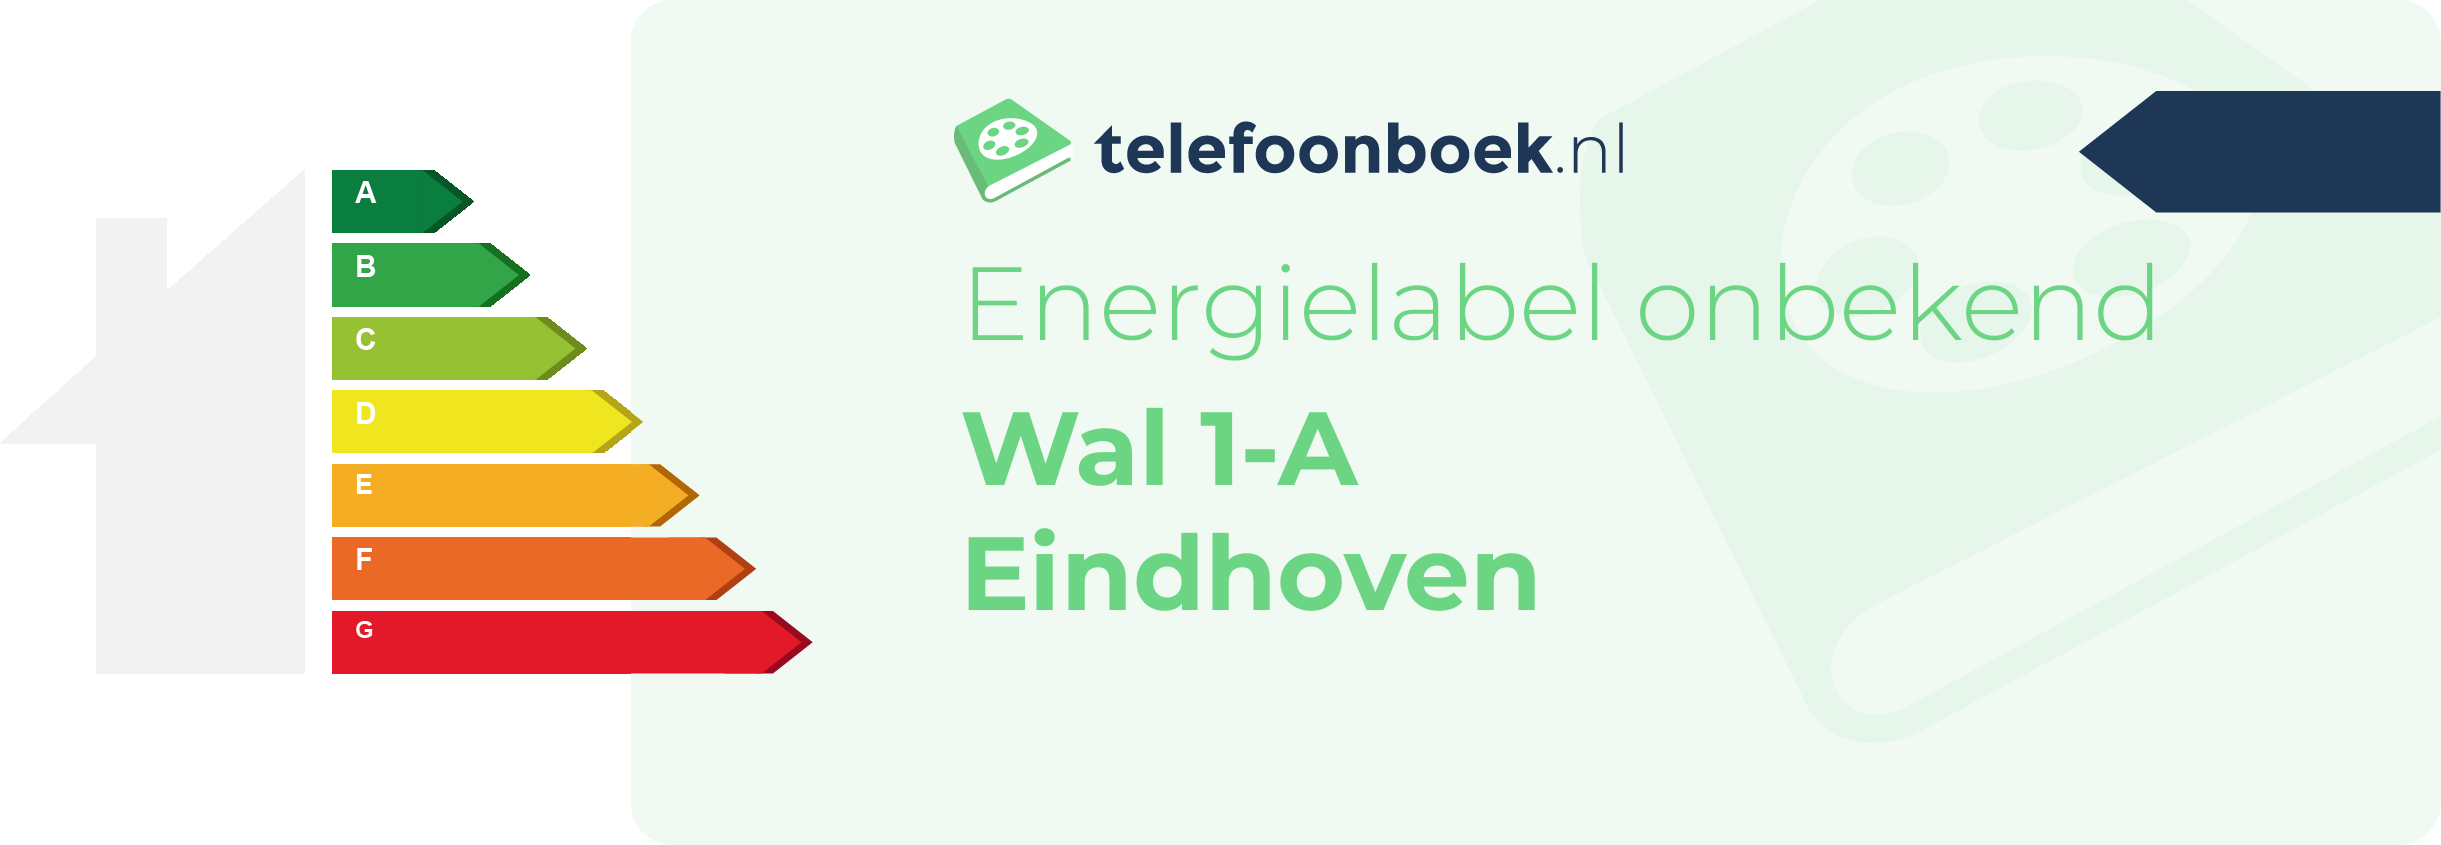 Energielabel Wal 1-A Eindhoven